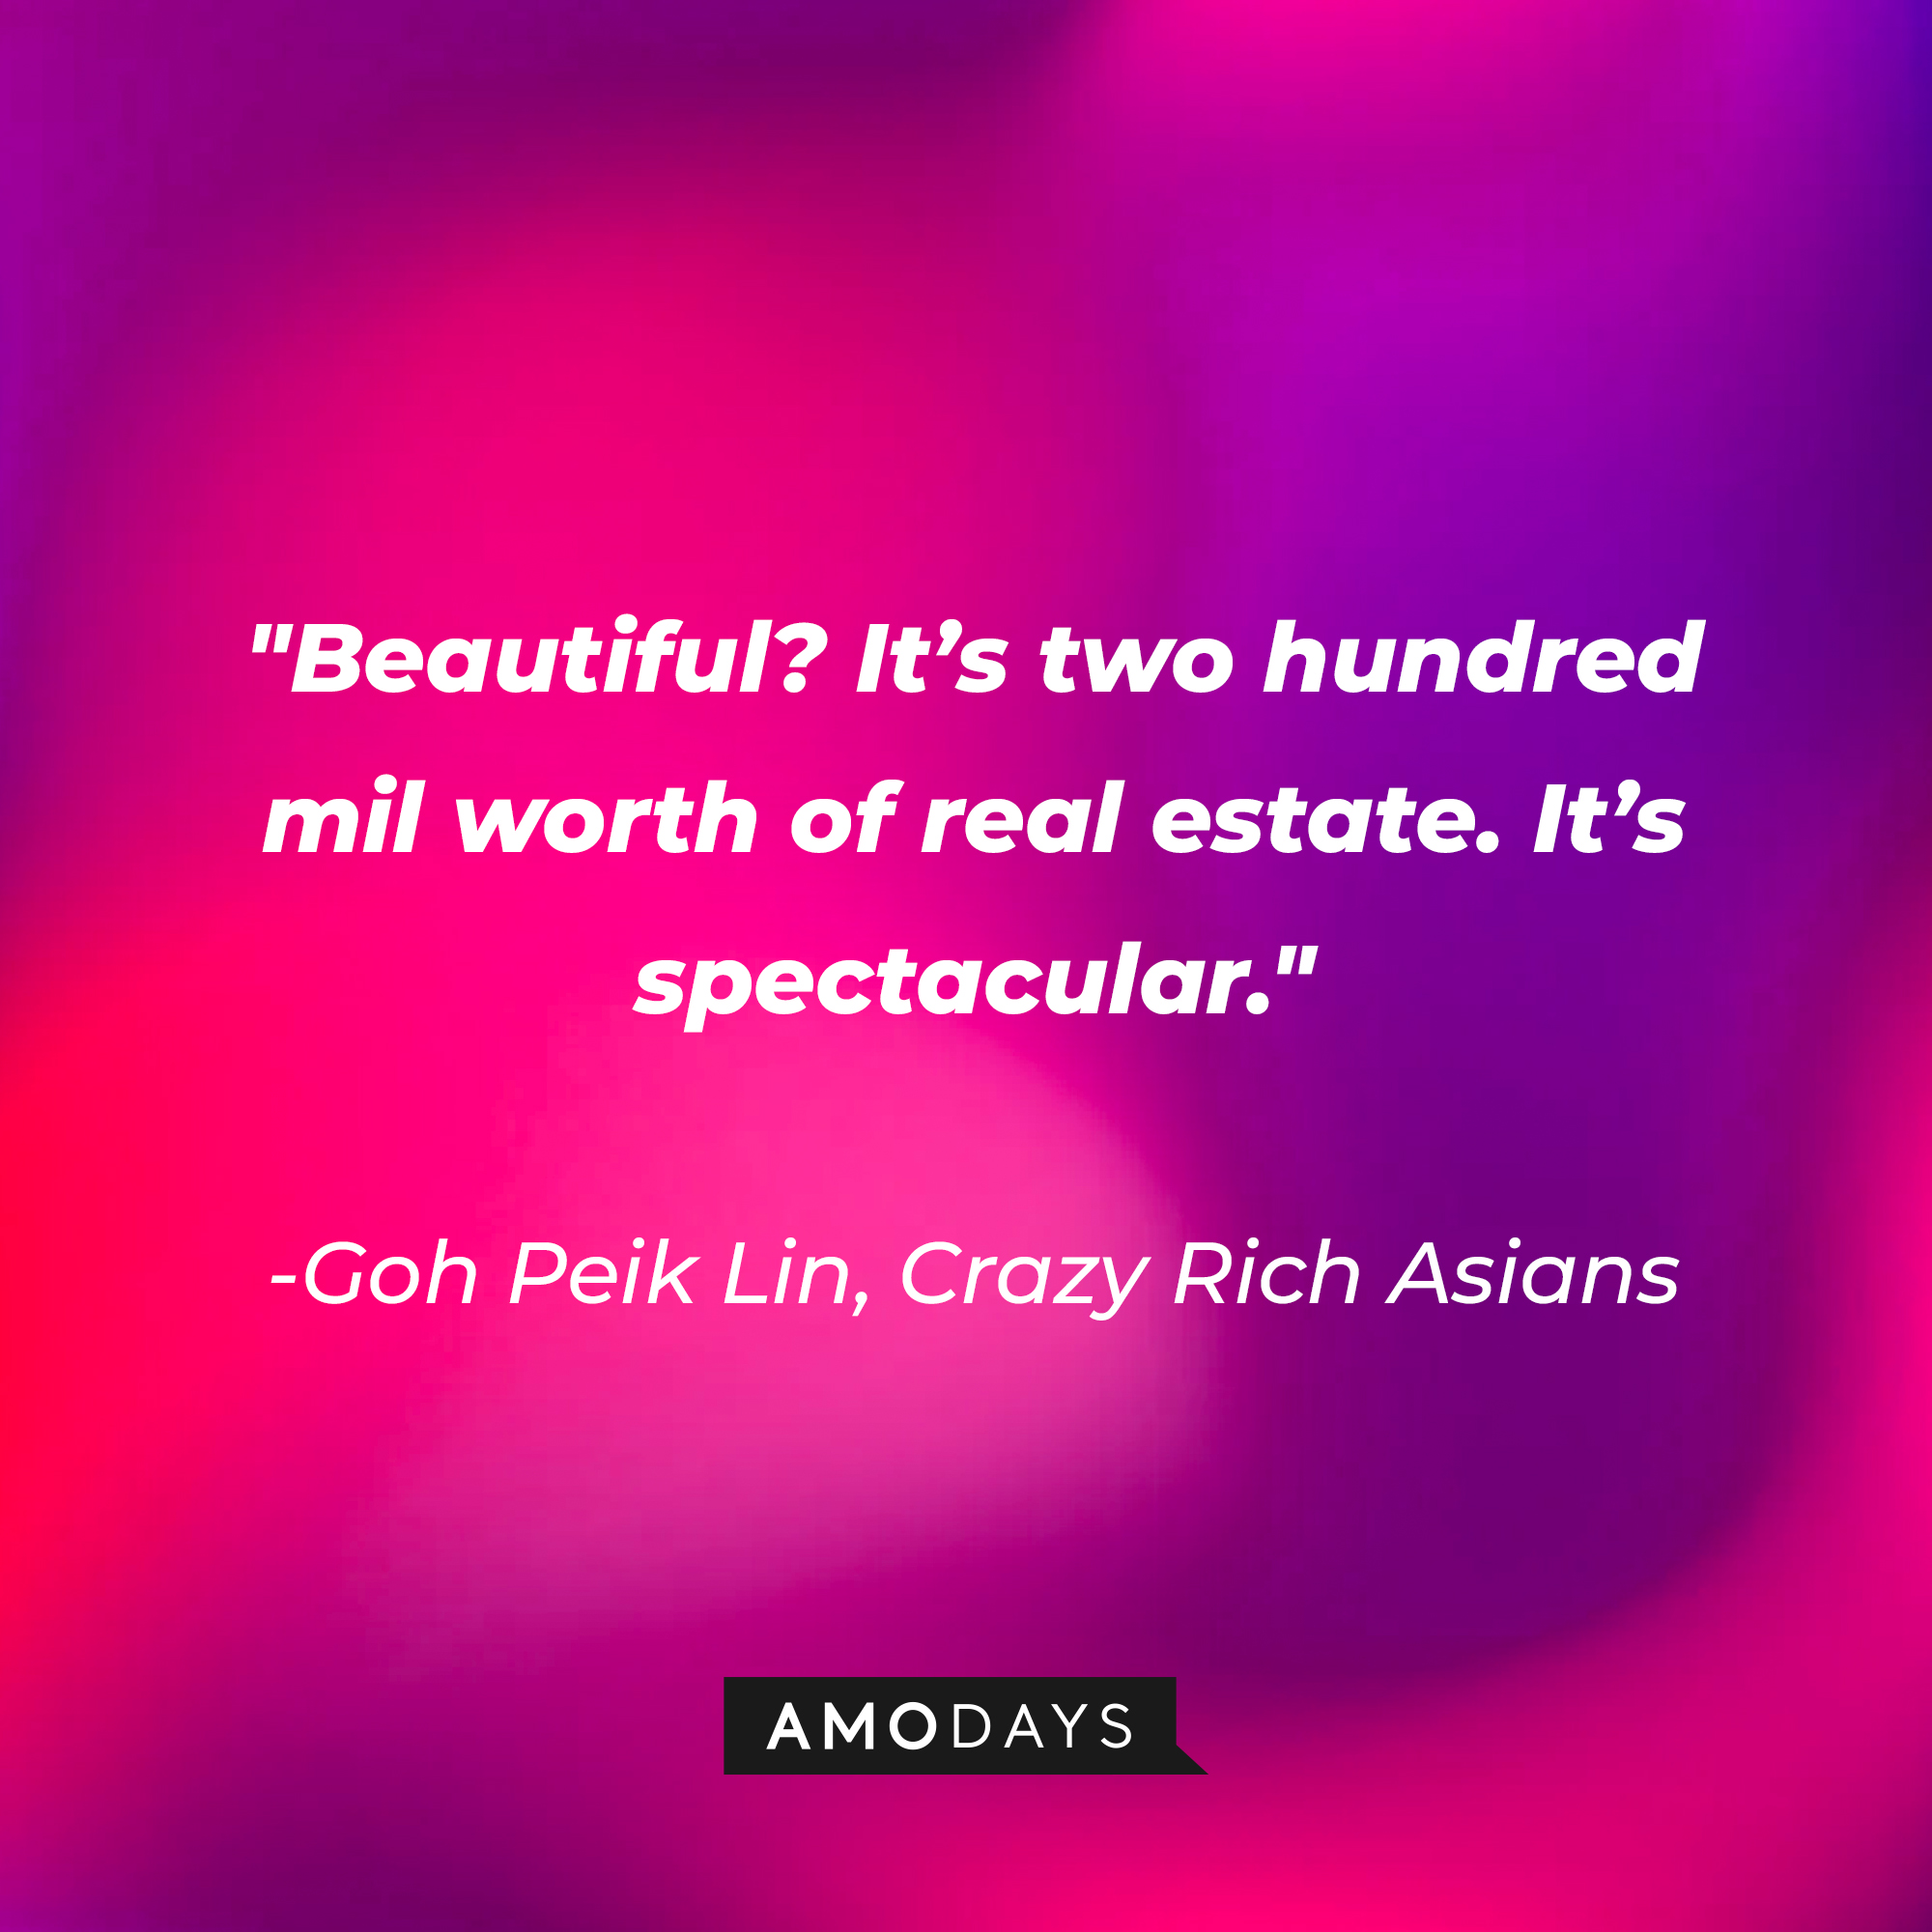 Goh Peik Lin's quote: "Beautiful? It's two hundred mil worth of real estate. It's spectacular." | Source: AmoDays